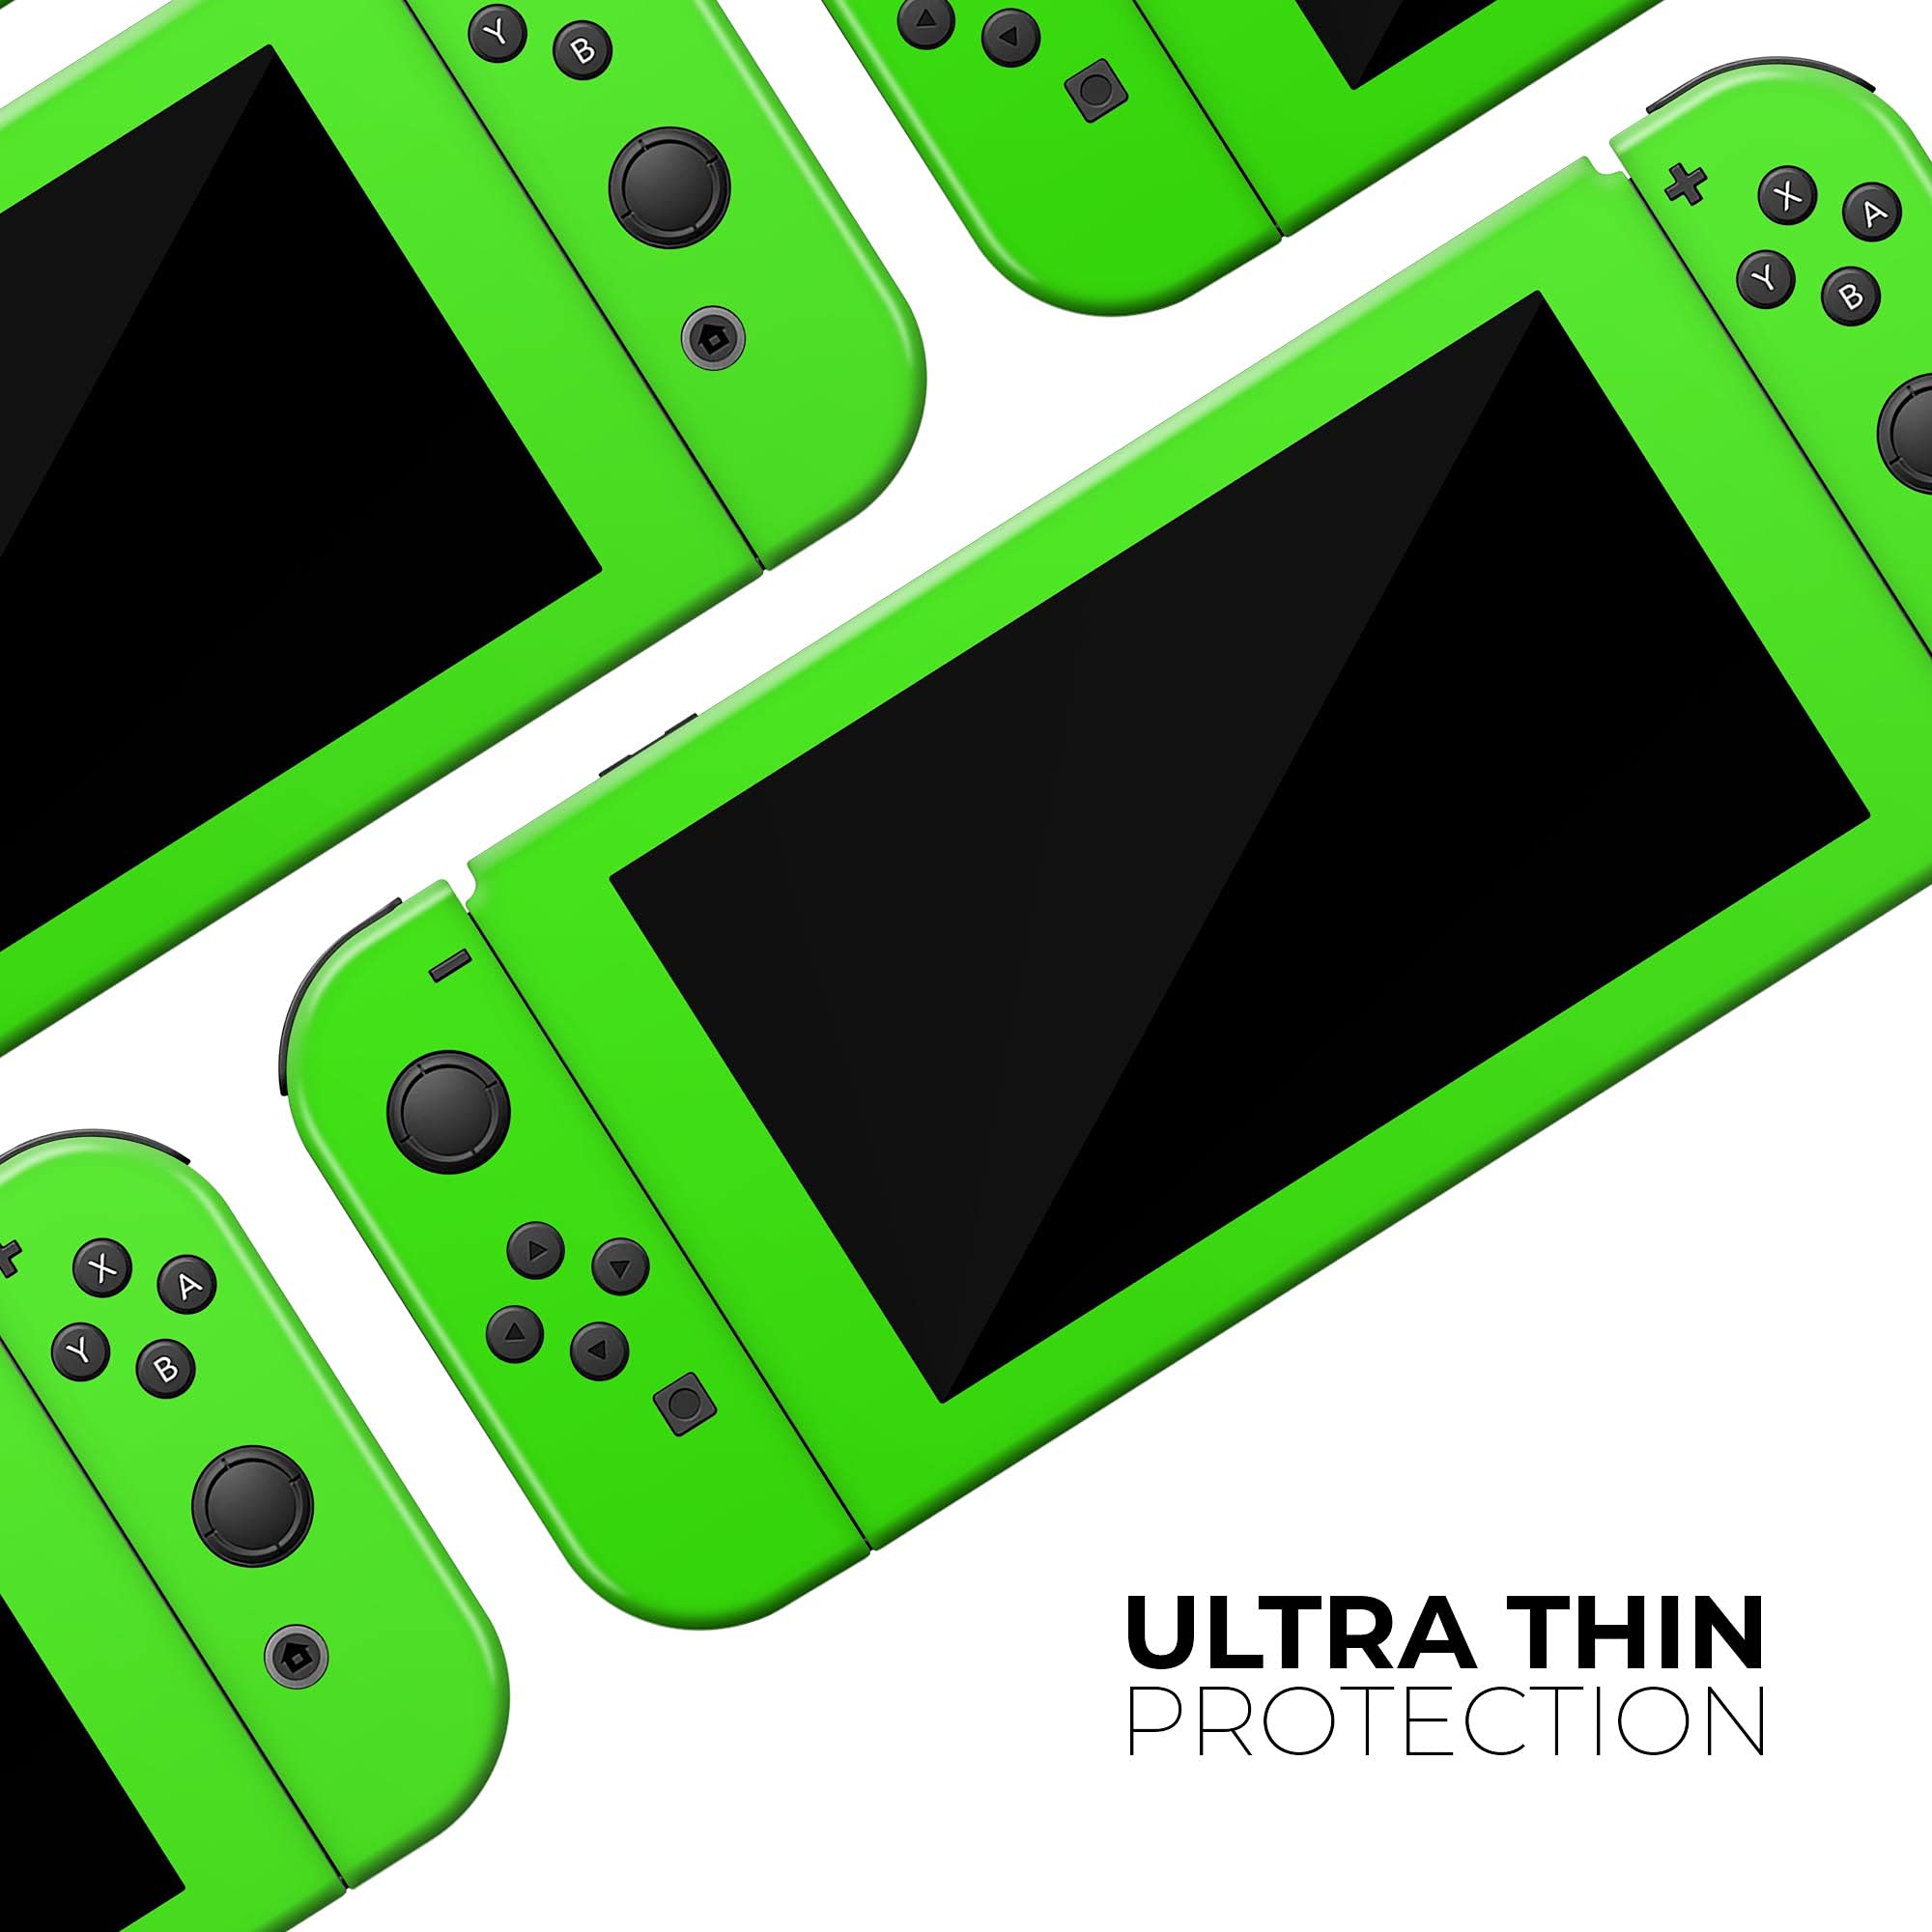 Design Skinz - Compatible with Nintendo Switch Console + Joy-Con - Skin Decal Protective Scratch-Resistant Removable Vinyl Wrap Cover - Solid Lime Green V2